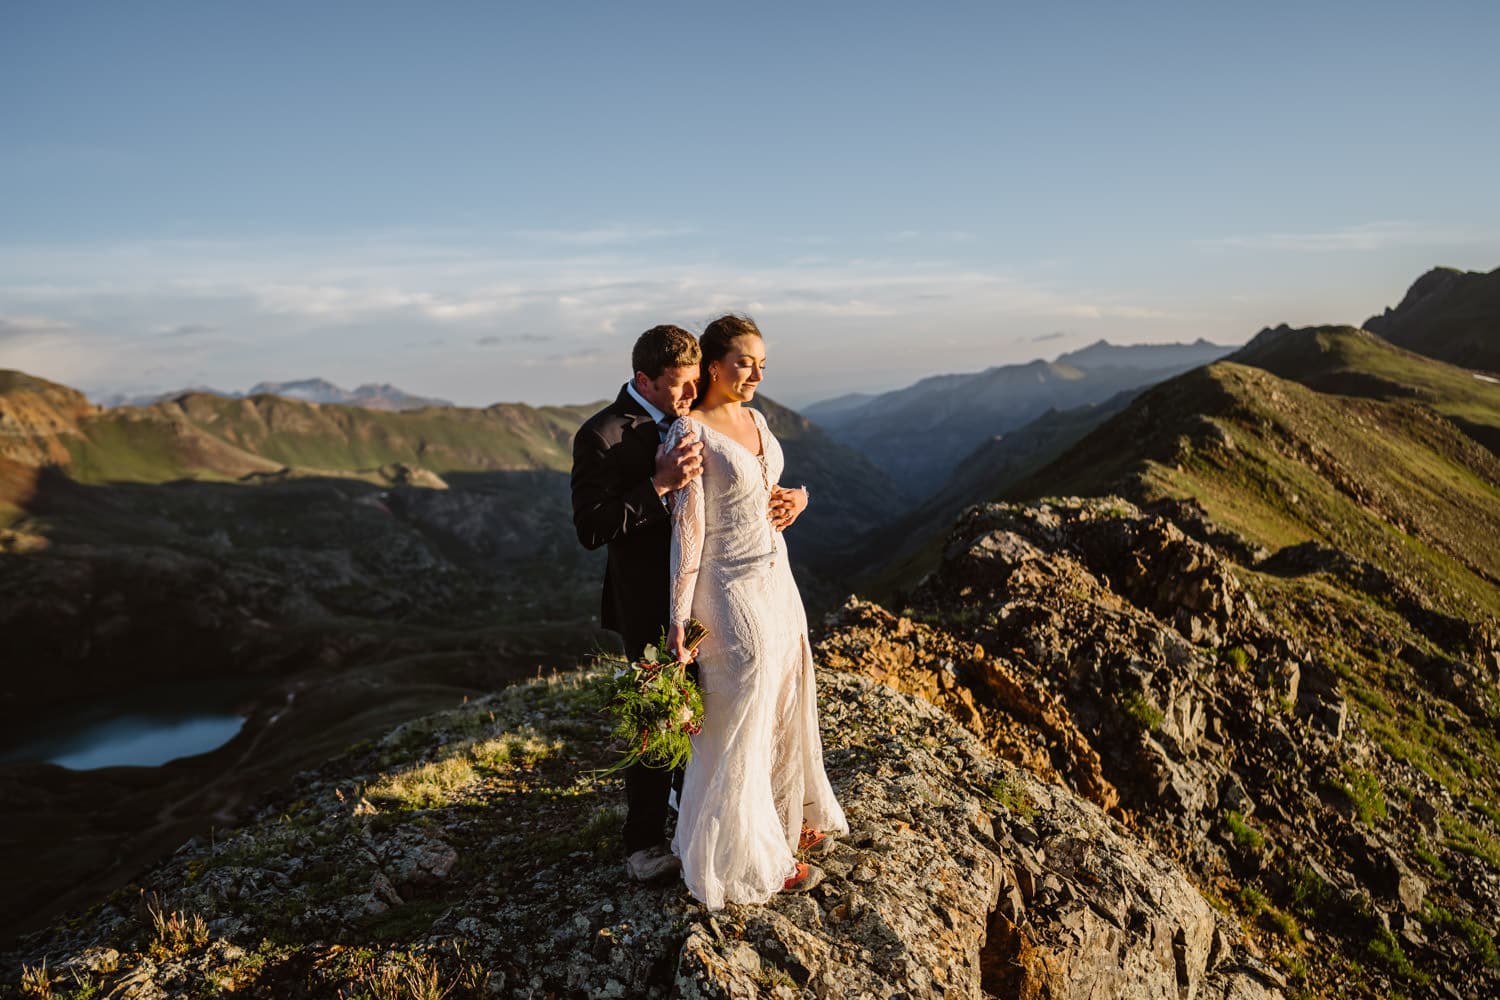 Bride and groom sharing an intimate moment in the mountains at sunrise.